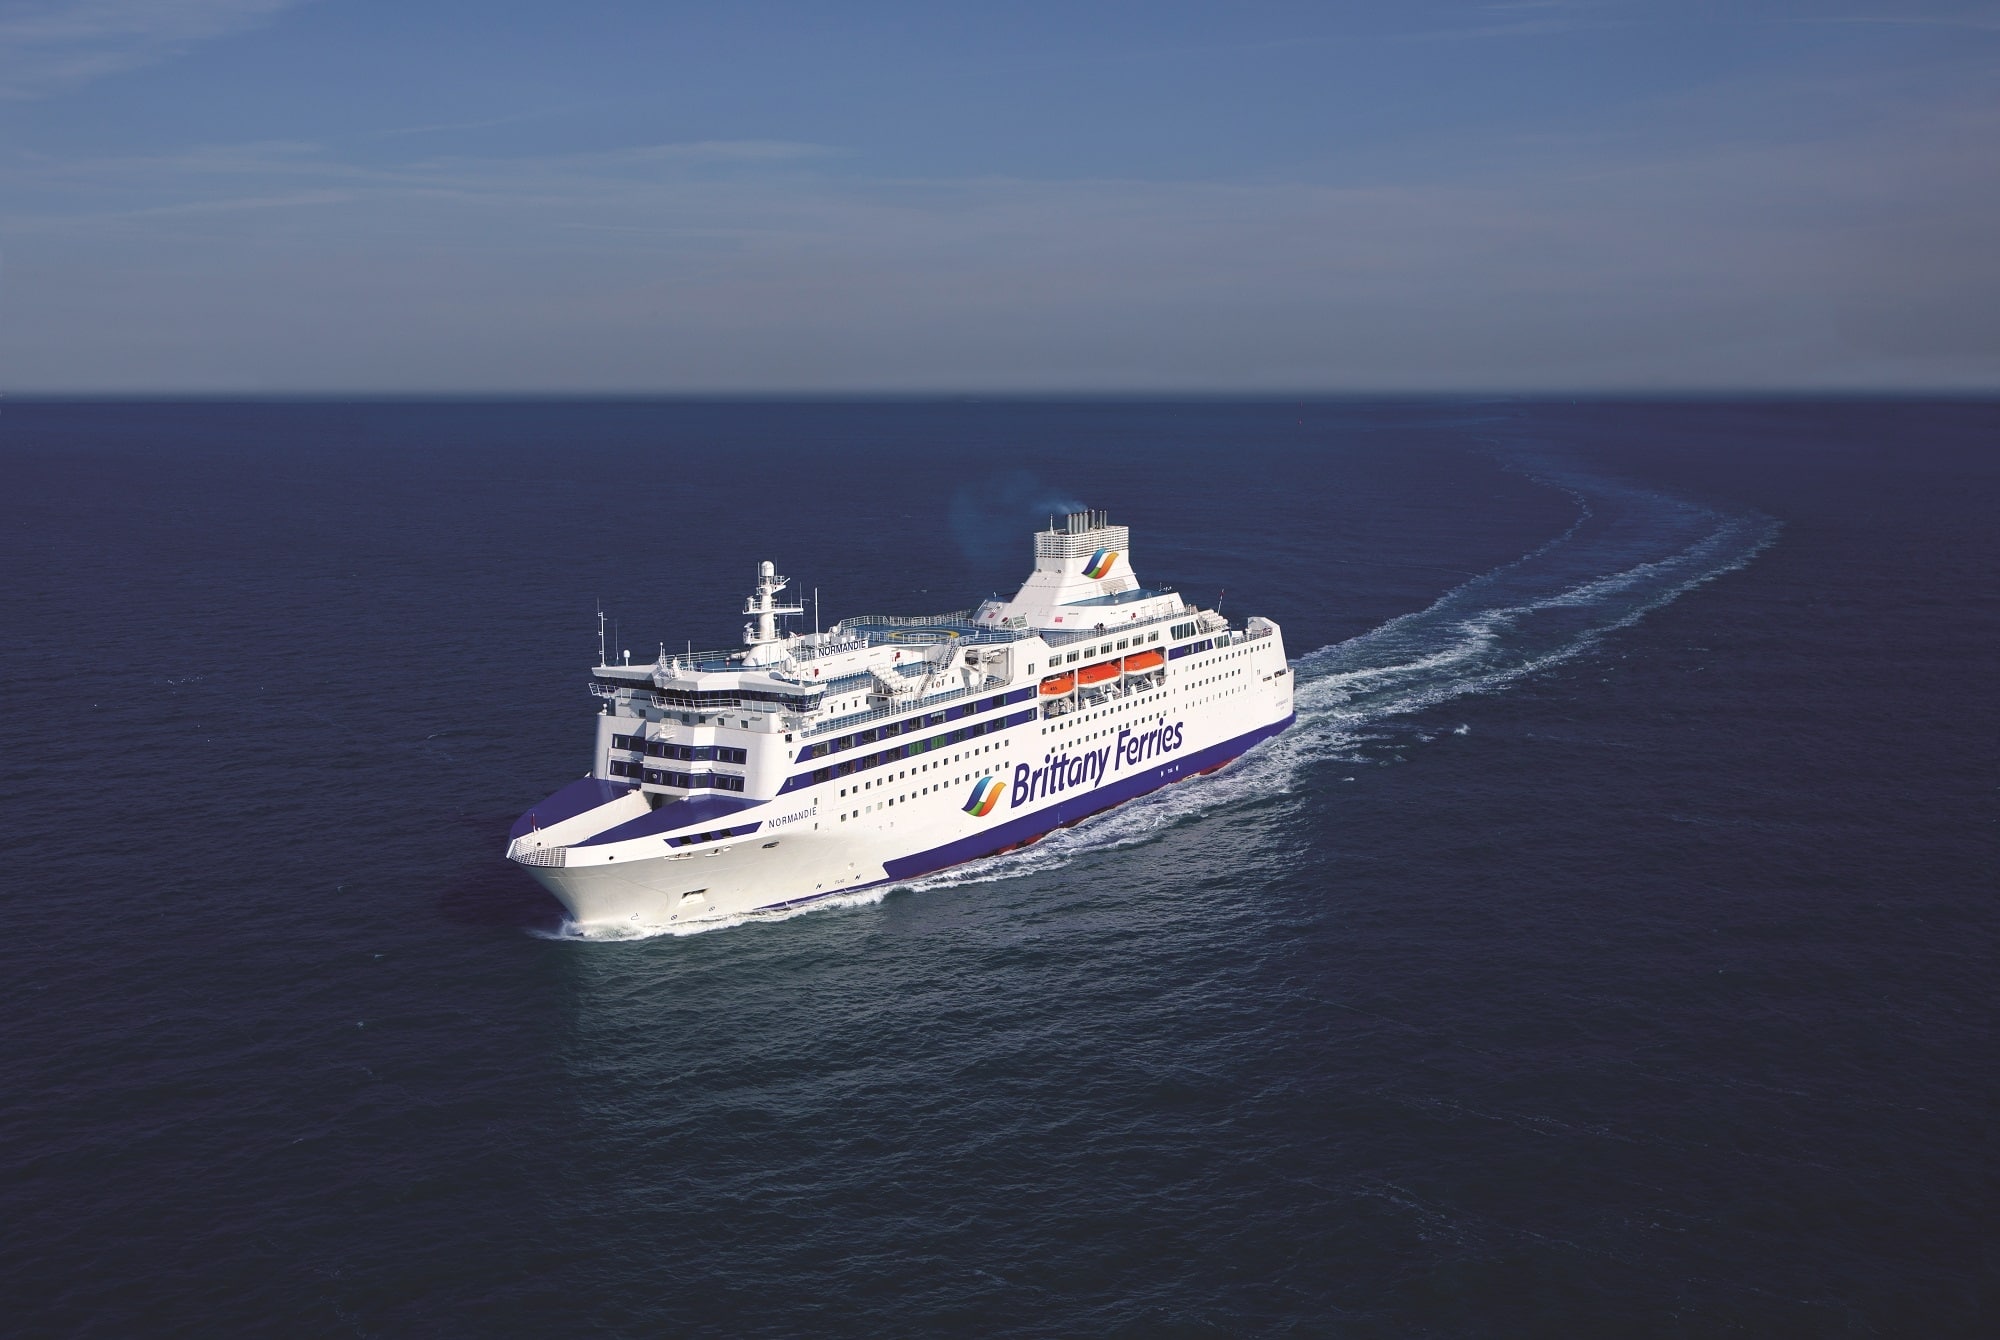 Brittany Ferries NORMANDIE wearing the new livery for the 2019 season. Brittany Ferries.